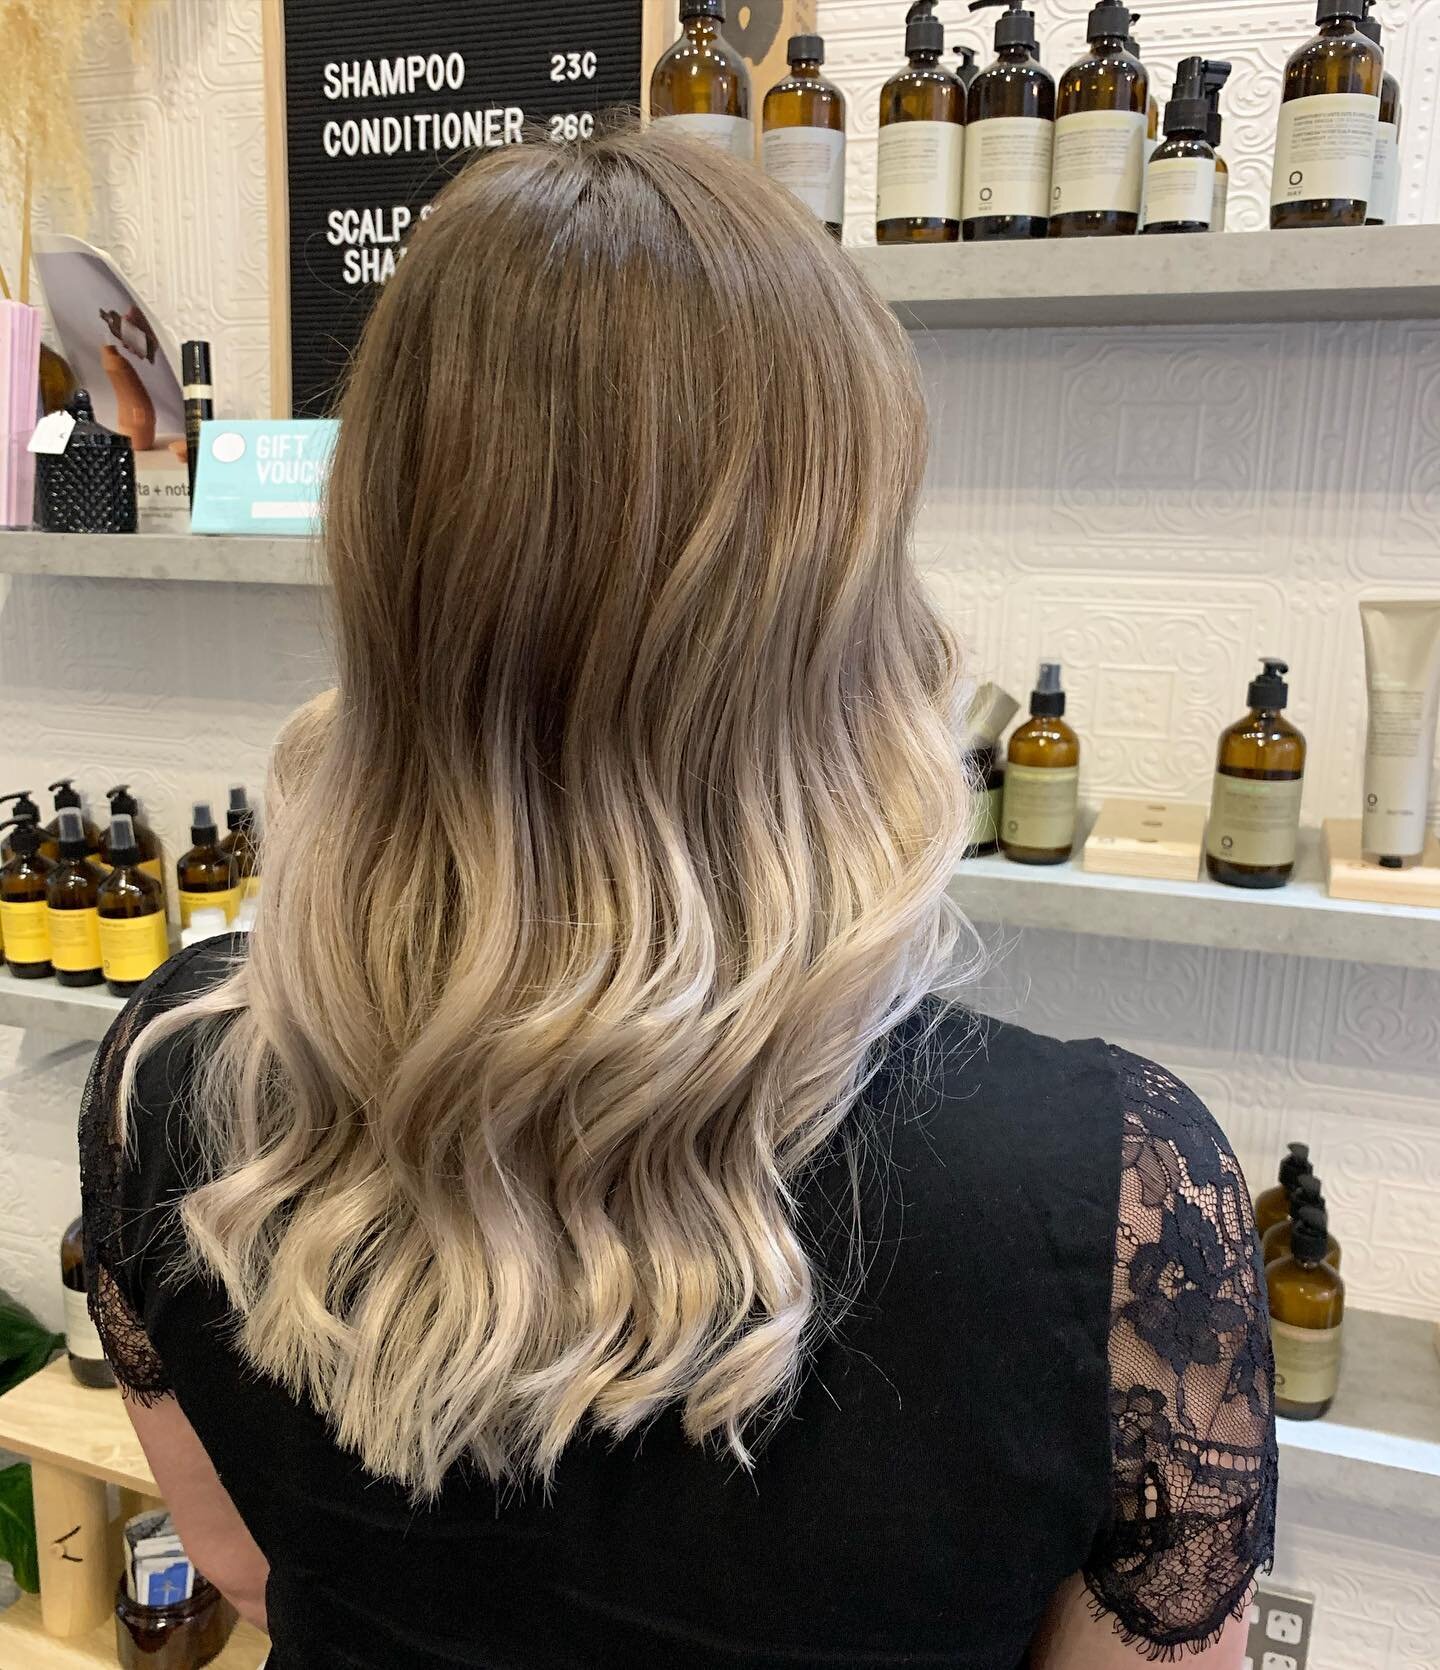 ICY BLONDE | BY SHALISA

Checkout this stunning ❄️ balayage by @hair.by.shalisa 🤍 Thanks to @olaplex treatment Toni&rsquo;s hair is still nice and healthy 🙌🏻
Swipe to see the before picture

#hair#hairstyle#haircolour#haircolor#oway#owaycolour#hai